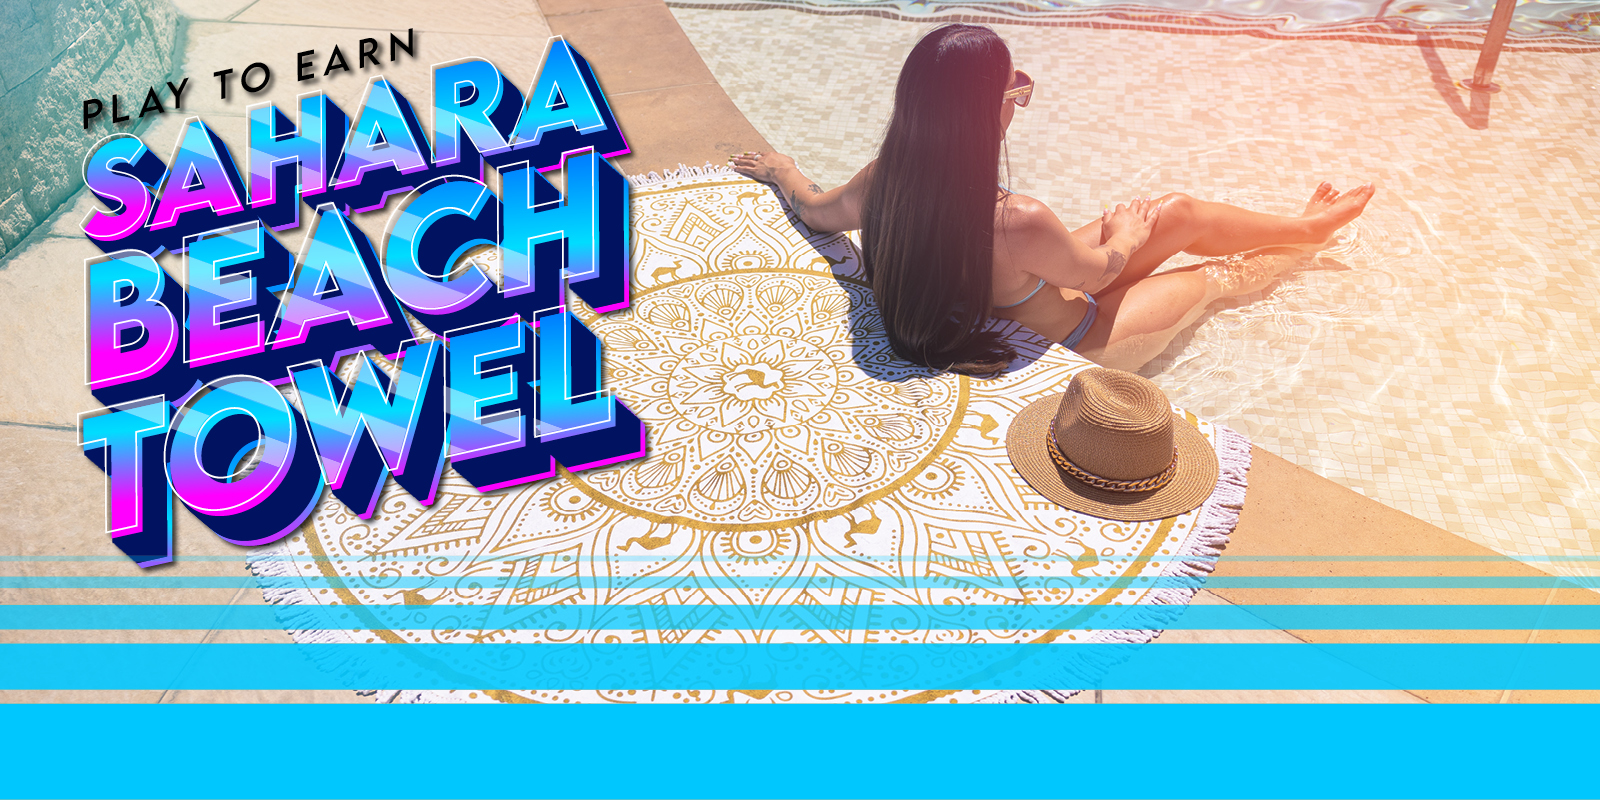 SHAARA branded beach towel promotional creative showing a girl sitting on the towel by the pool.